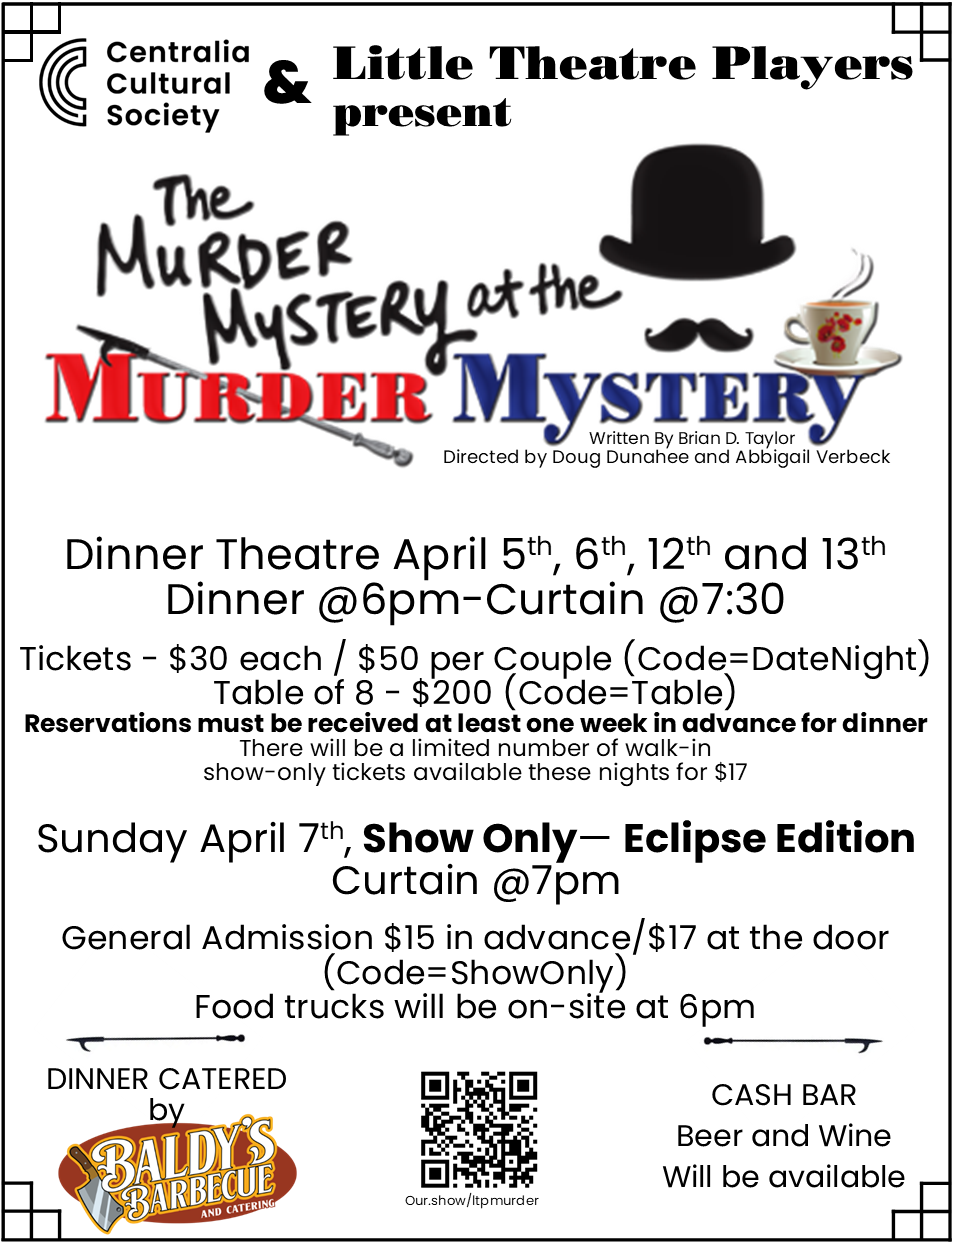 The Murder Mystery at the Murder Mystery